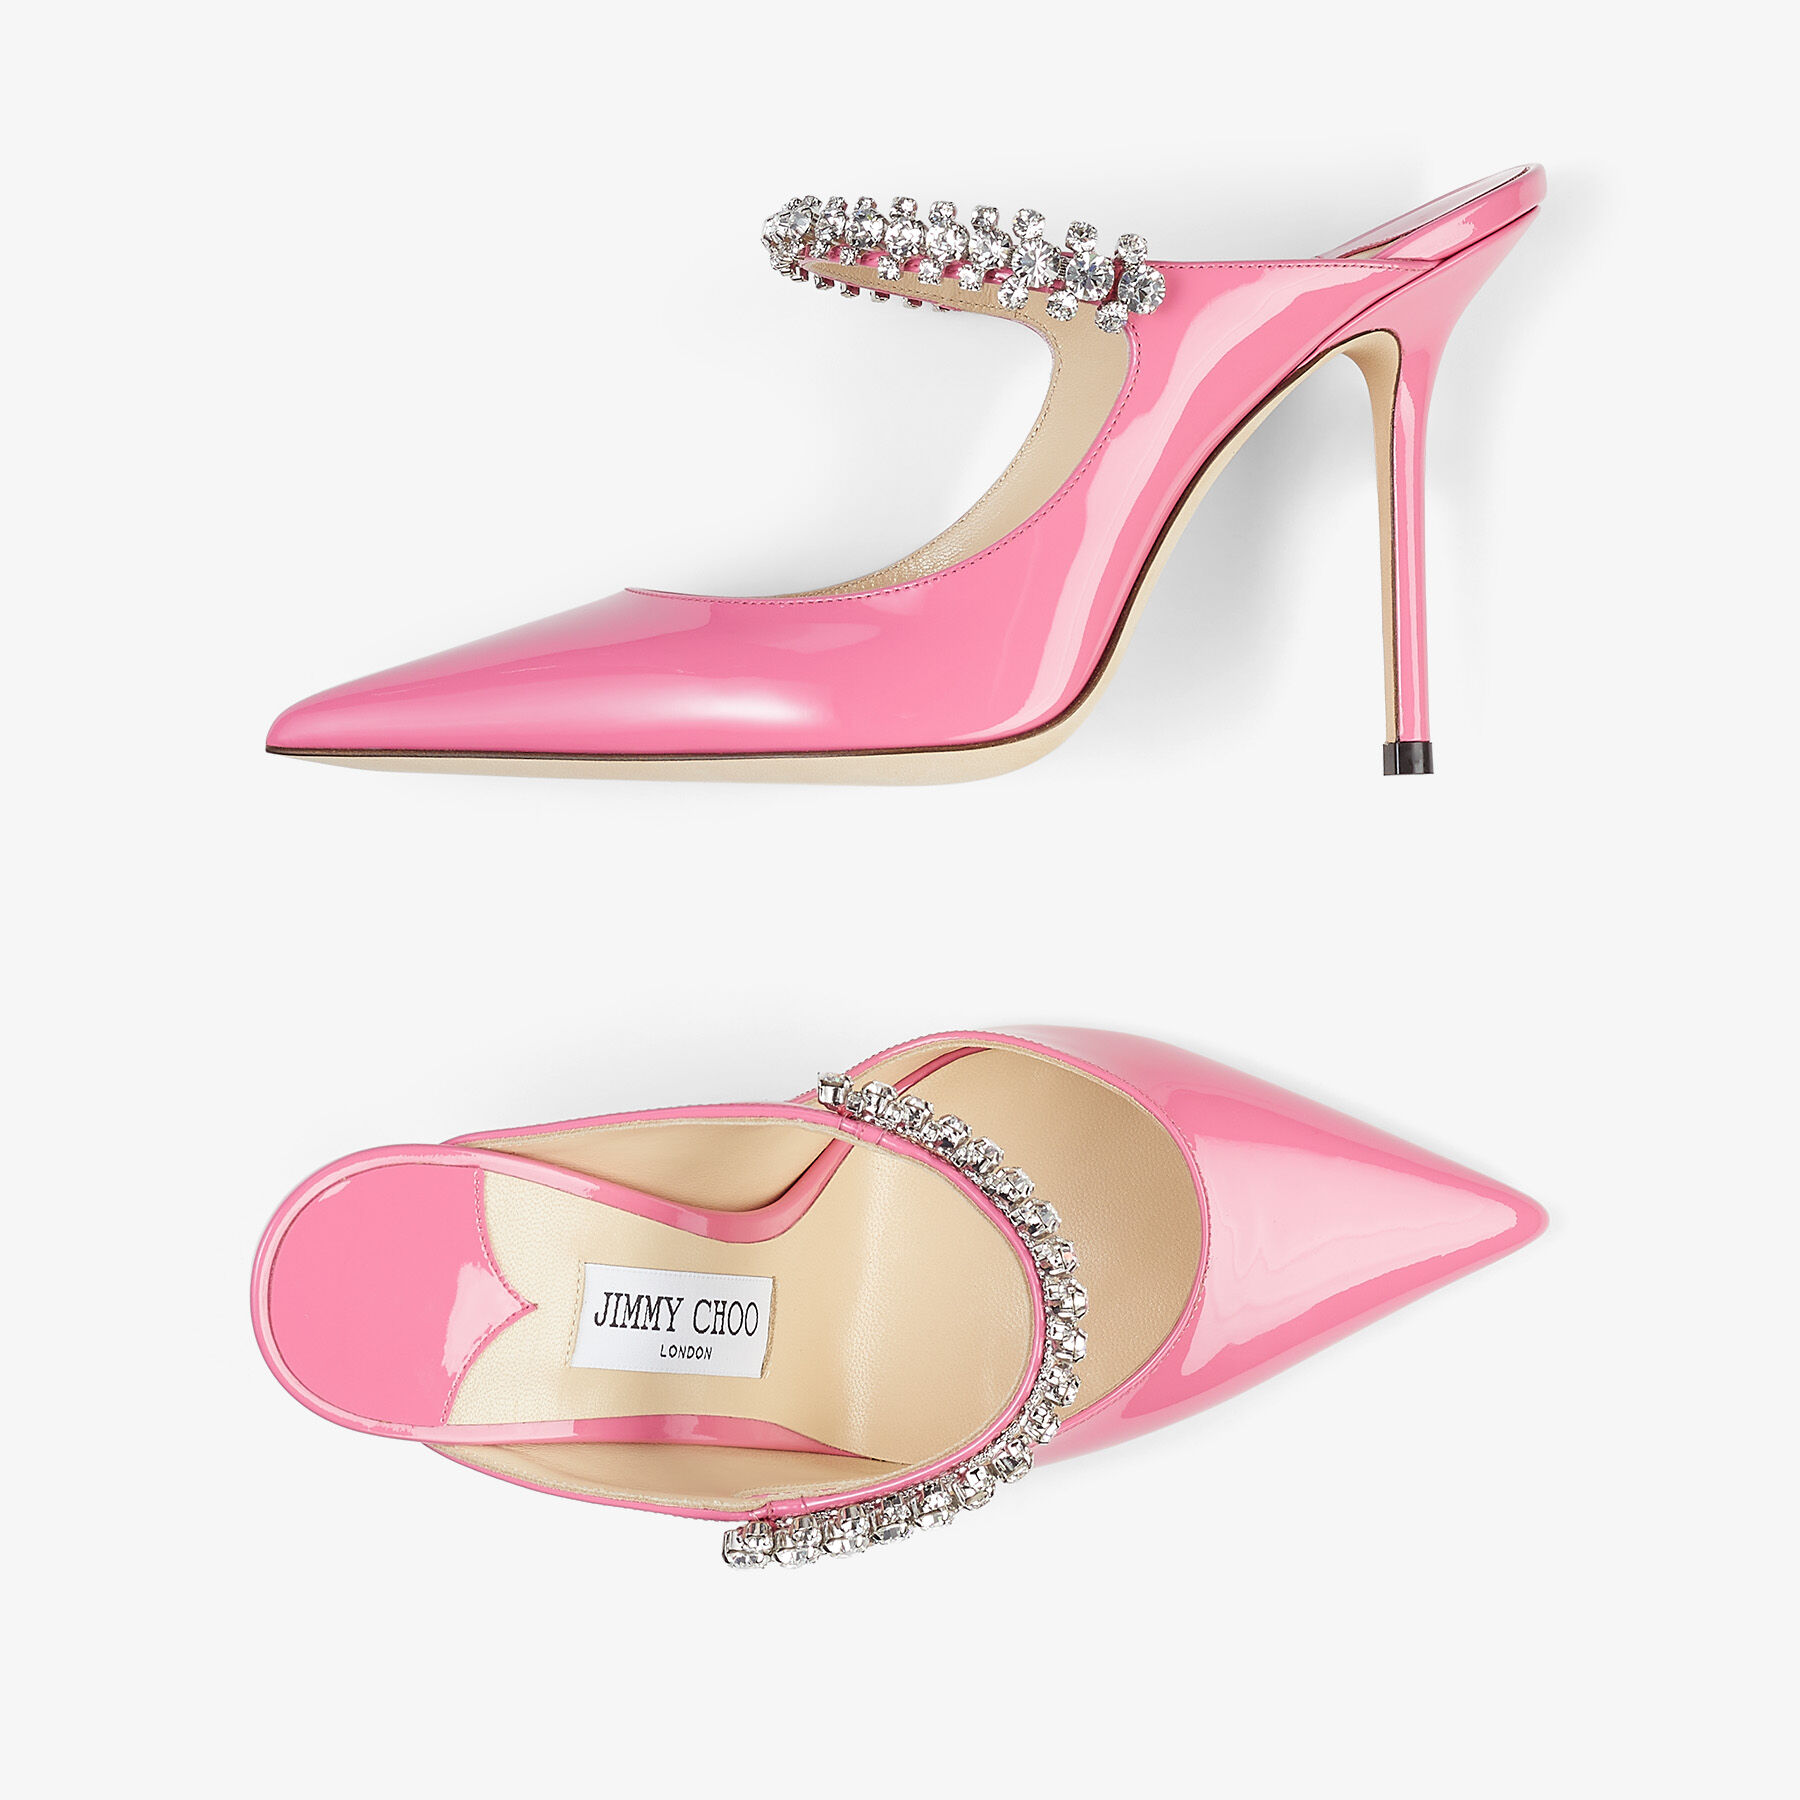 Candy Pink Patent Leather Pumps with Crystal Strap | BING 100 